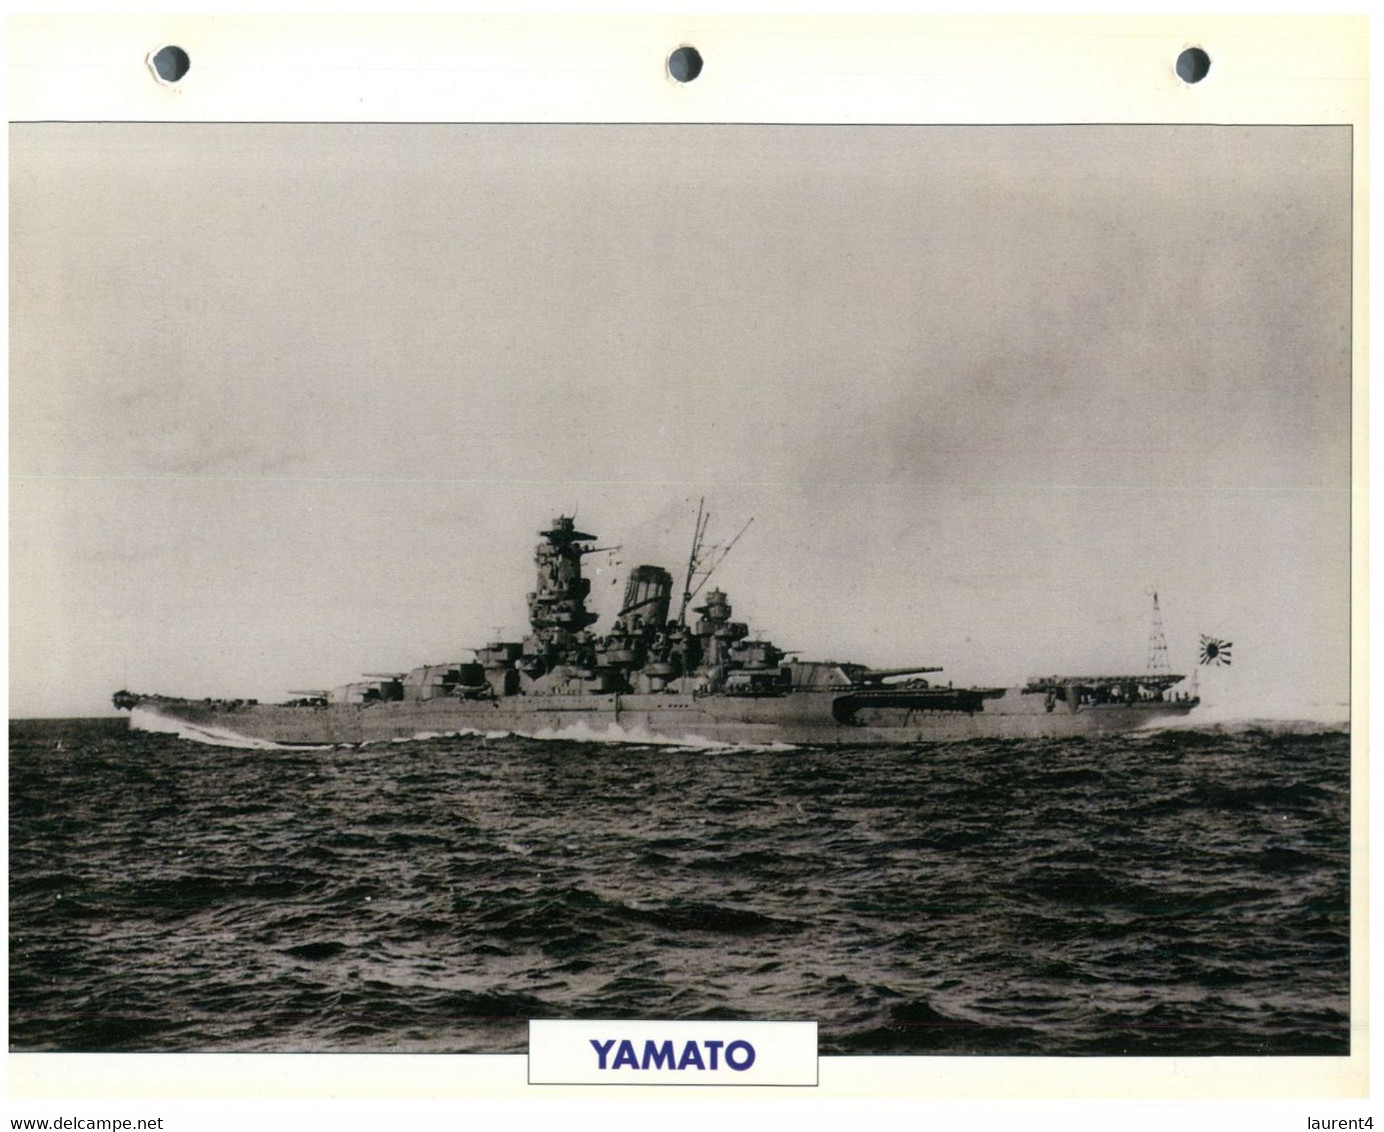 (25 X 19 Cm) (8-9-2021) - T - Photo And Info Sheet On Warship - Japan Navy - Yamoto - Bateaux